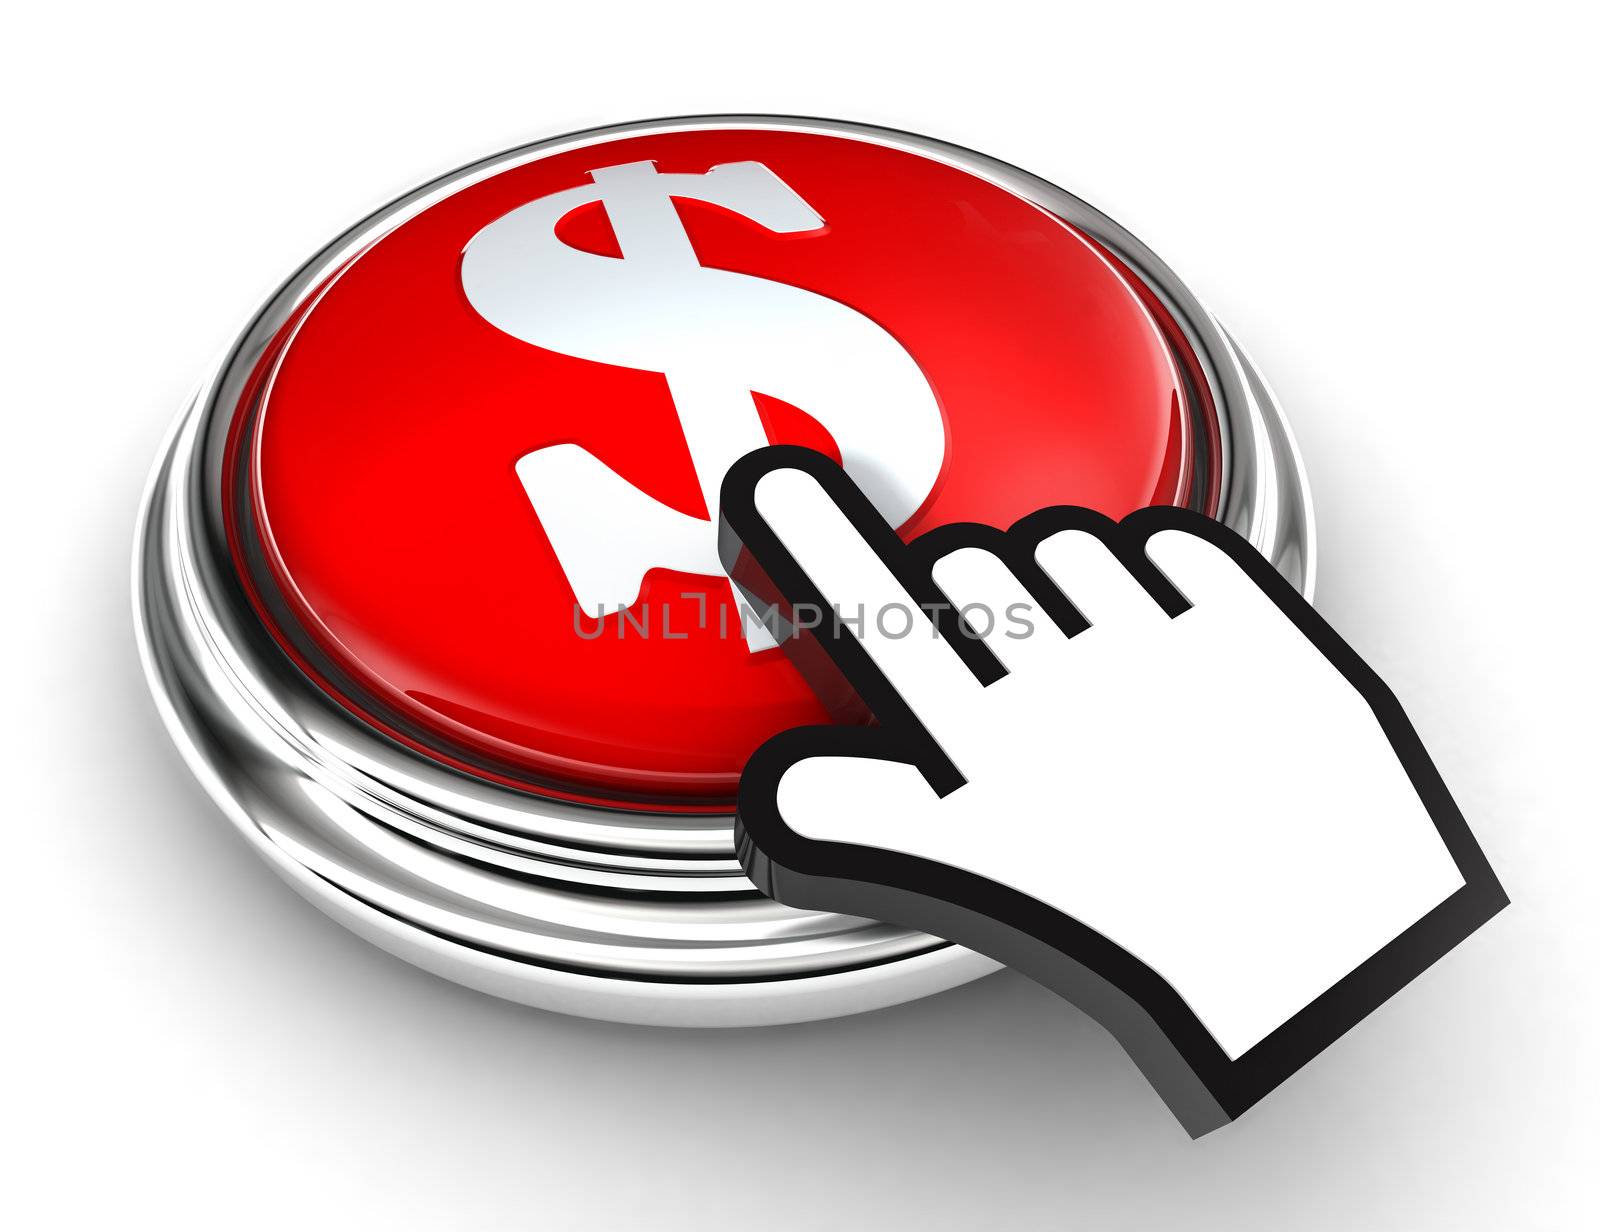 dollar symbol red button and pointer hand by donskarpo